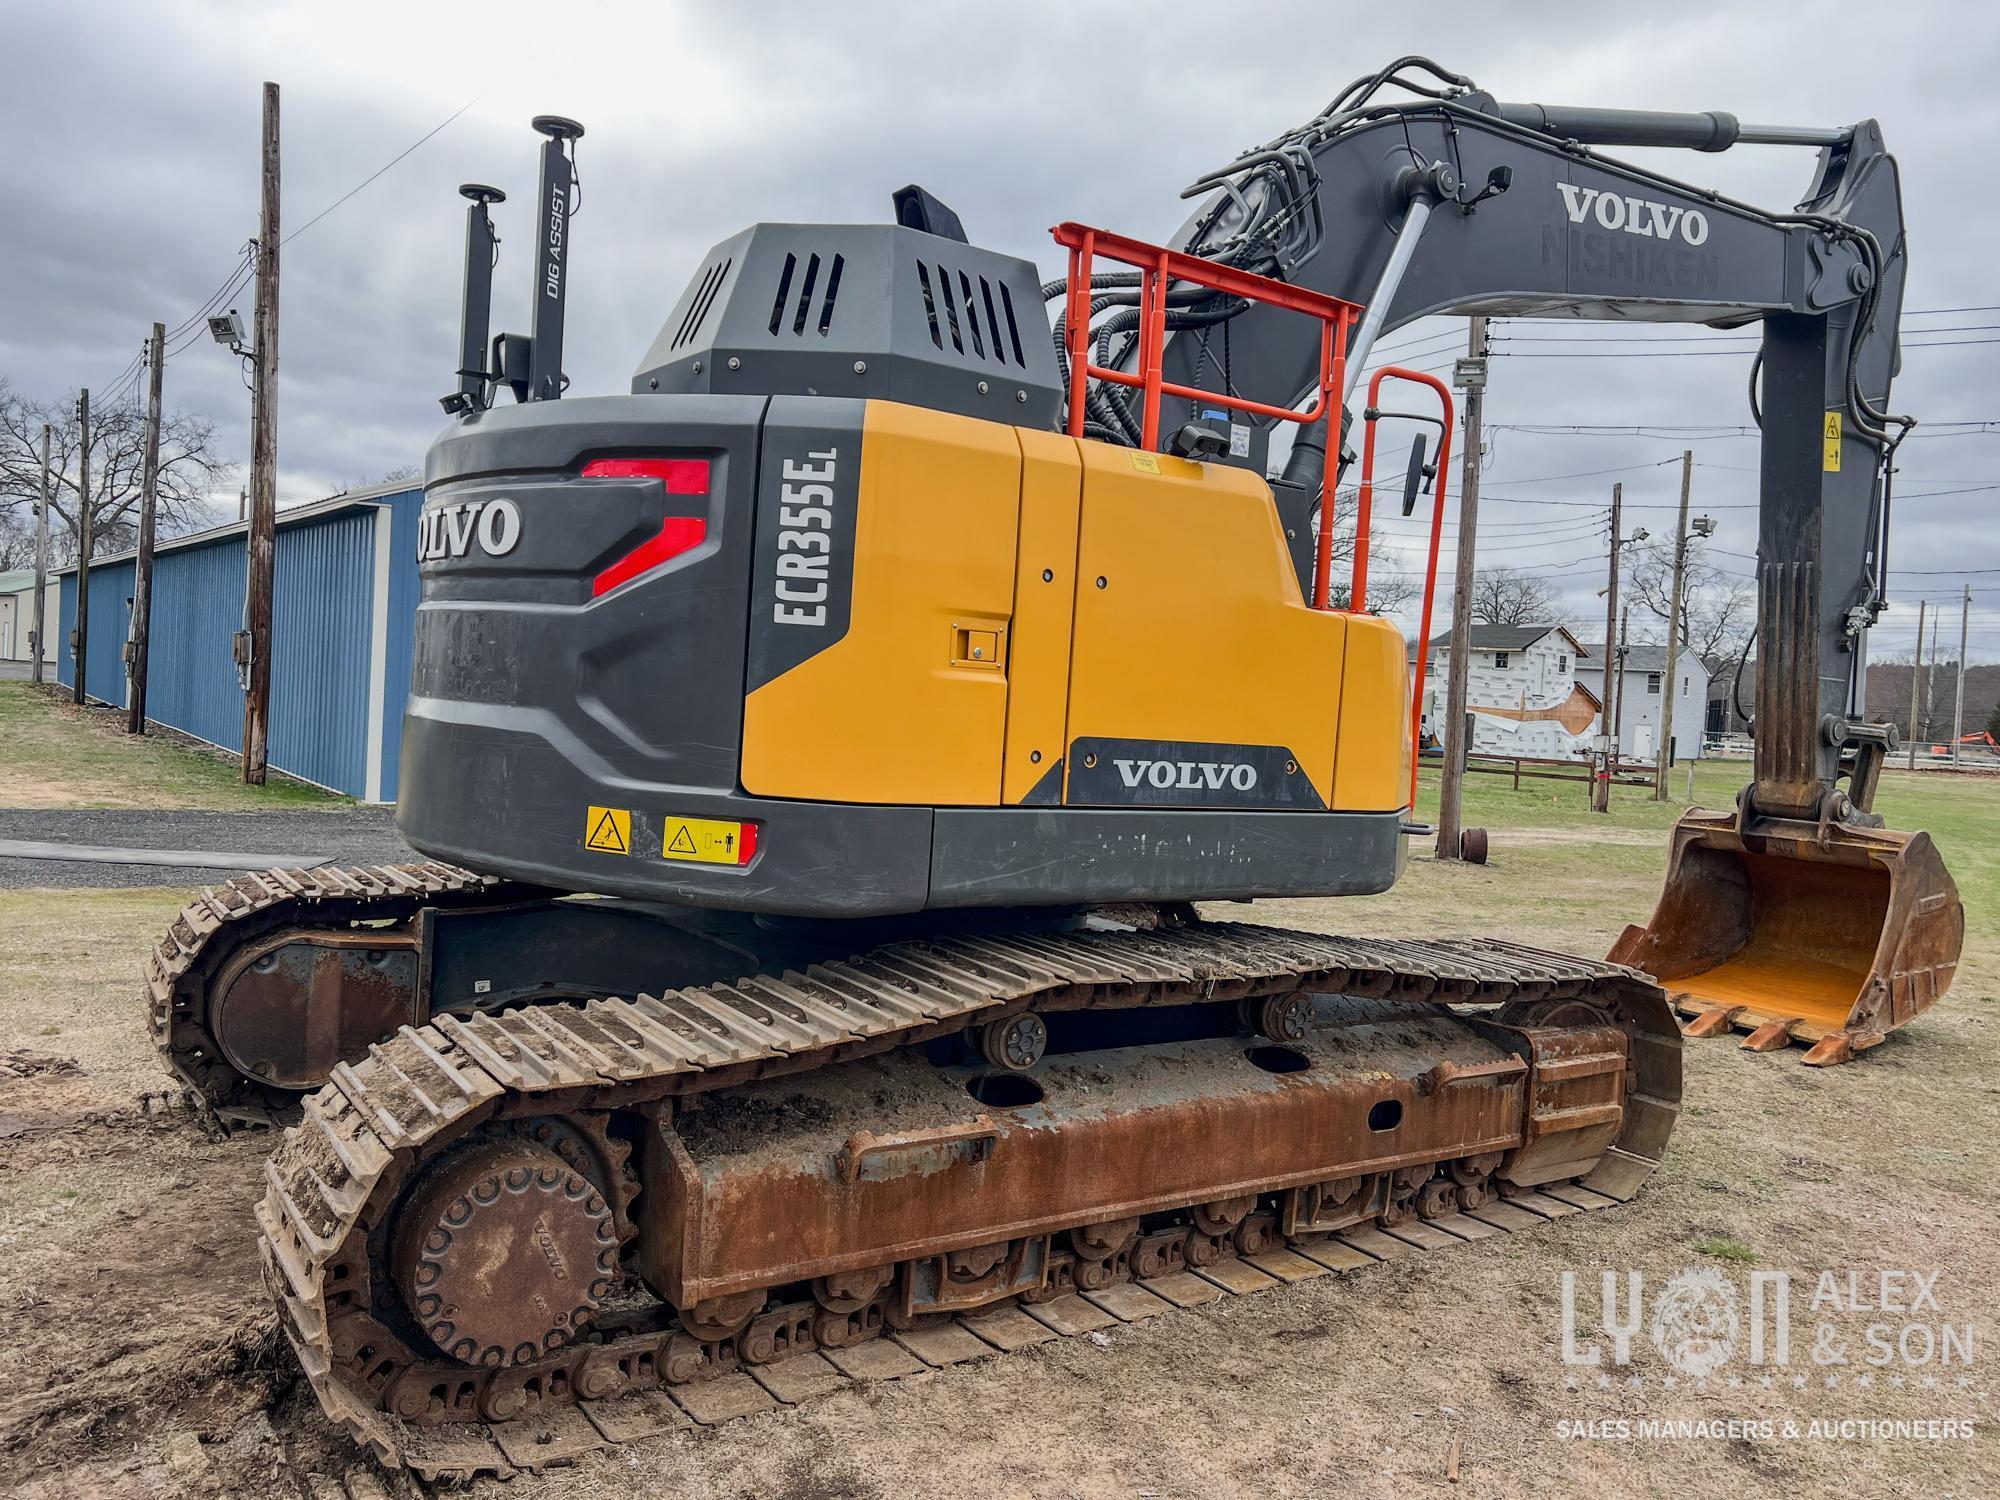 2022 VOLVO ECR355EL HYDRAULIC EXCAVATOR SN-314500... ...powered by diesel engine, equipped with Cab,